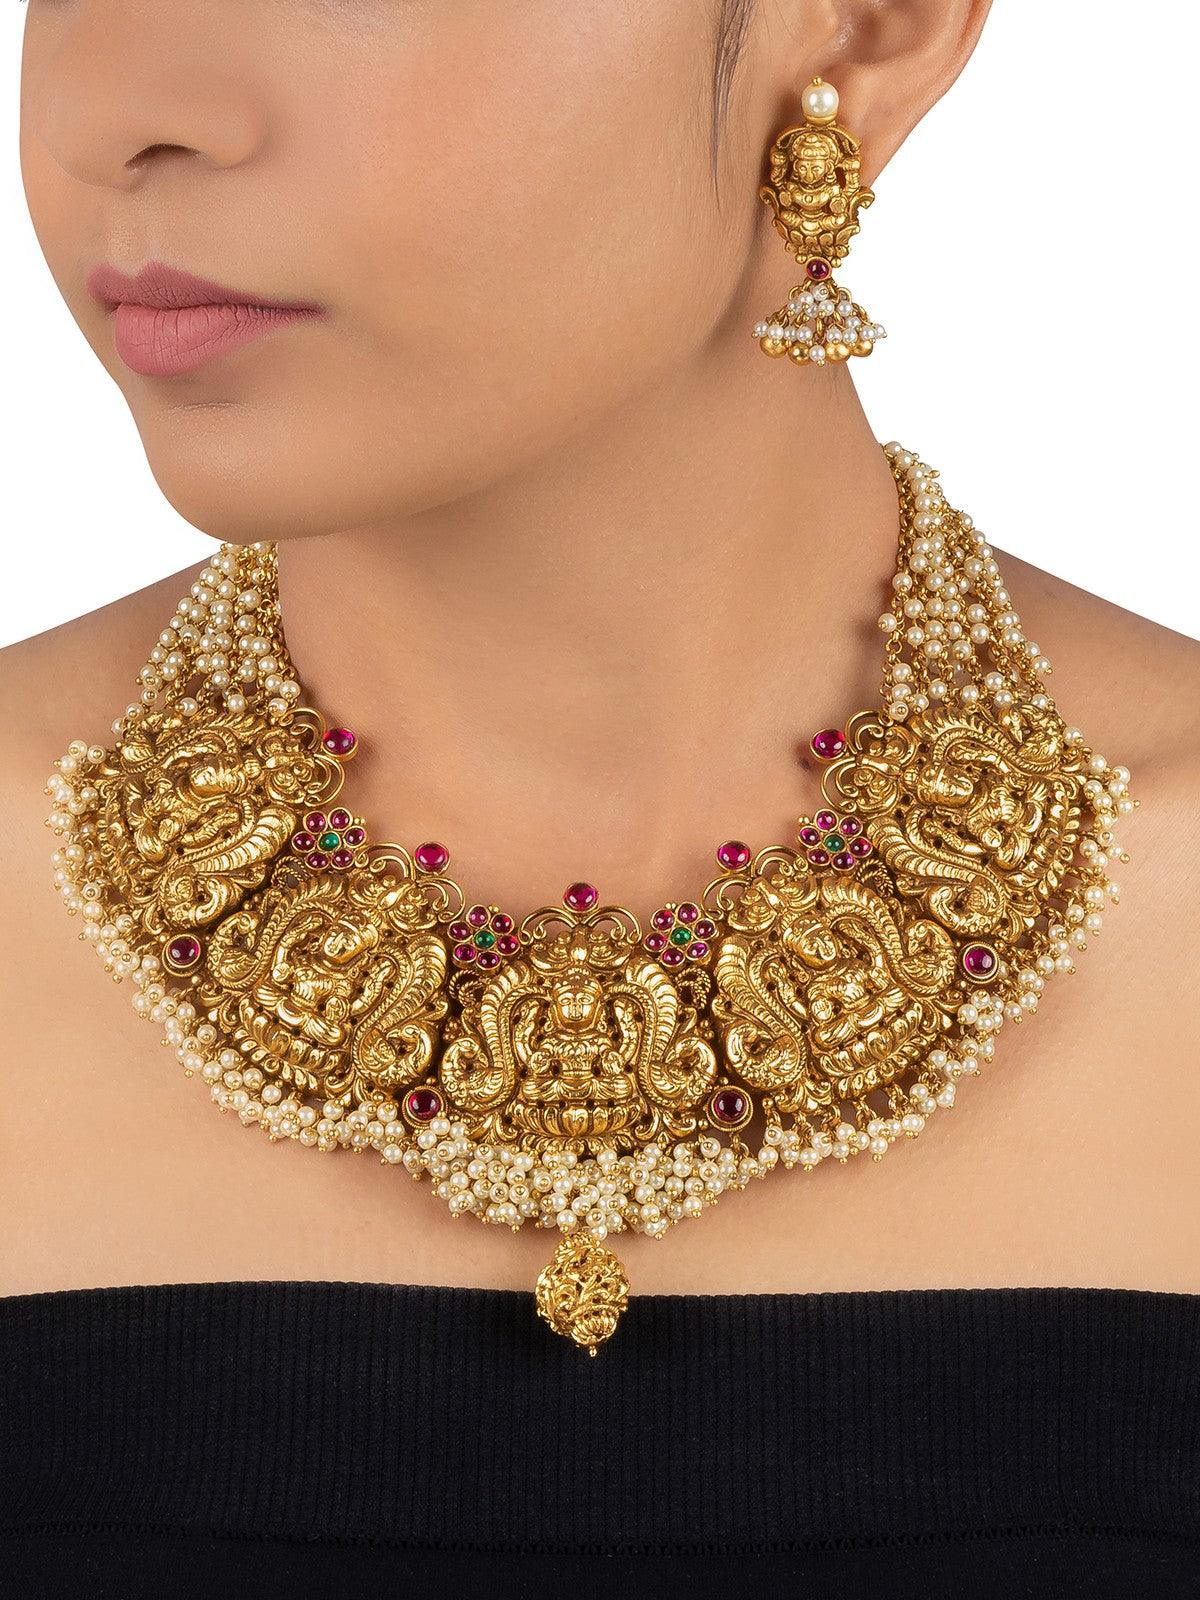 Carved Lakshmi Jadau Gold Plated Temple Necklace set with Jhumki earrings